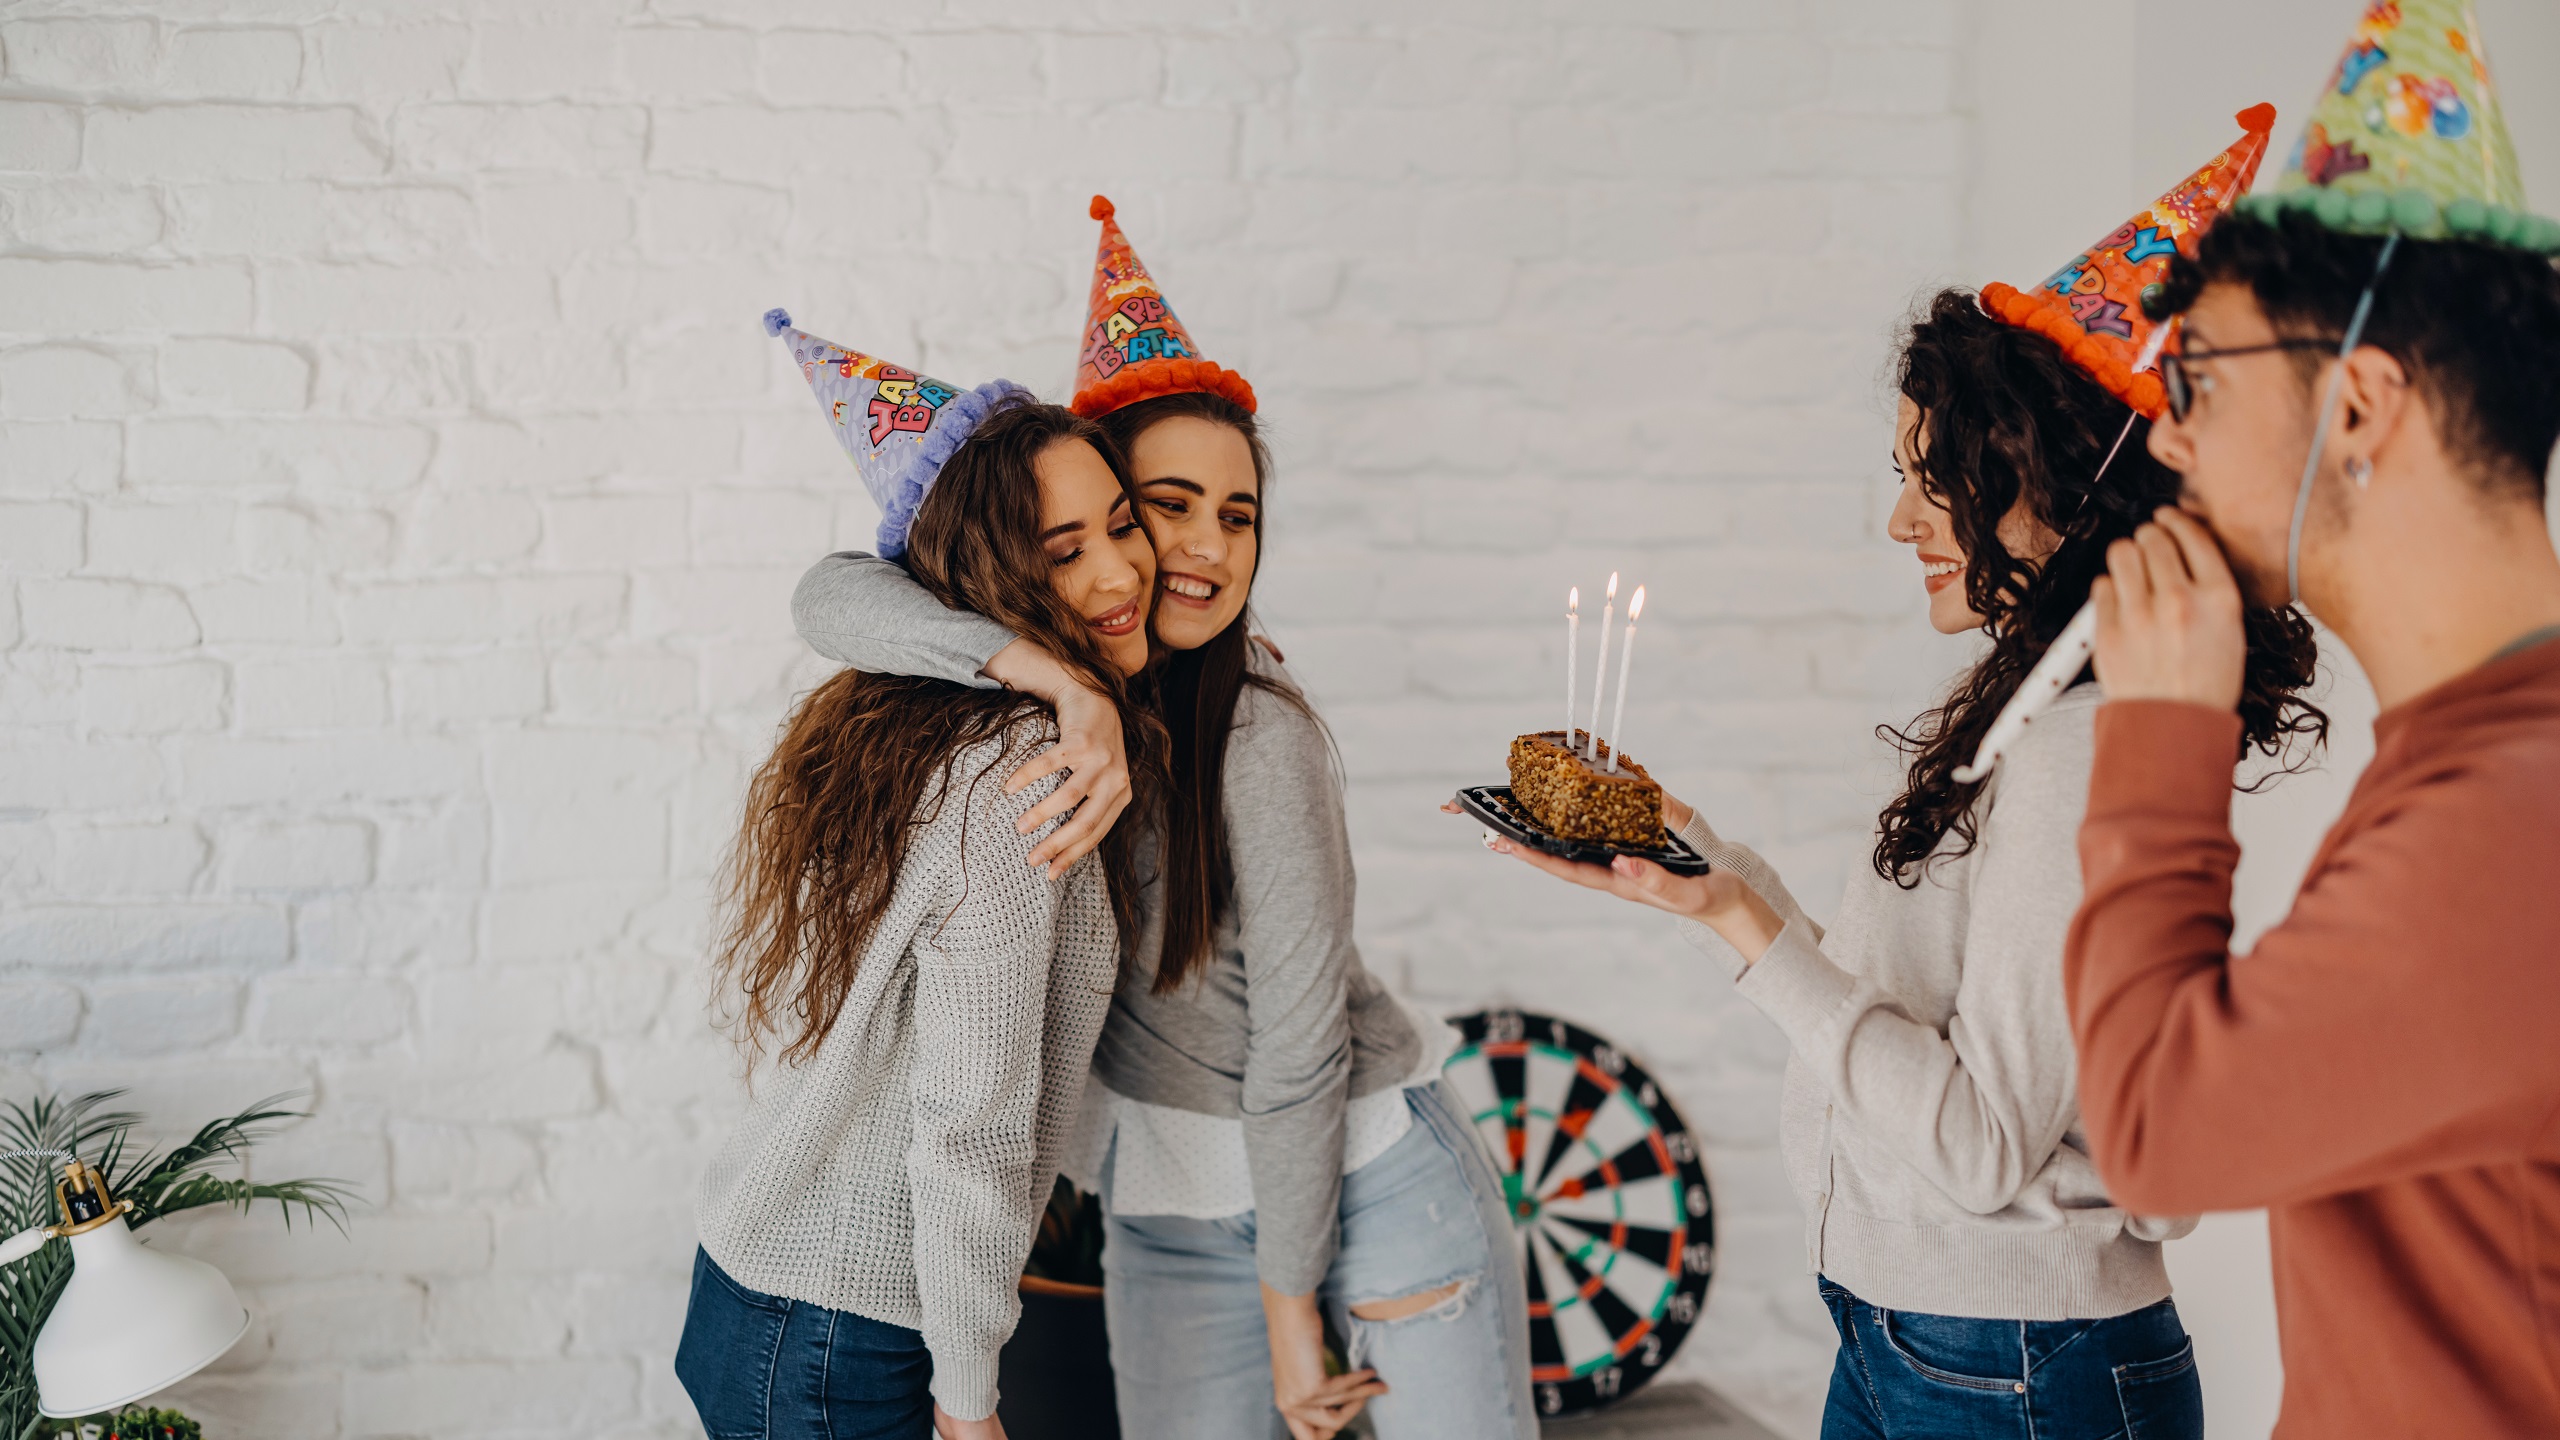 Hosting a party? Make life easier with this list of essentials everyone  needs to make life easier when hosting a party.